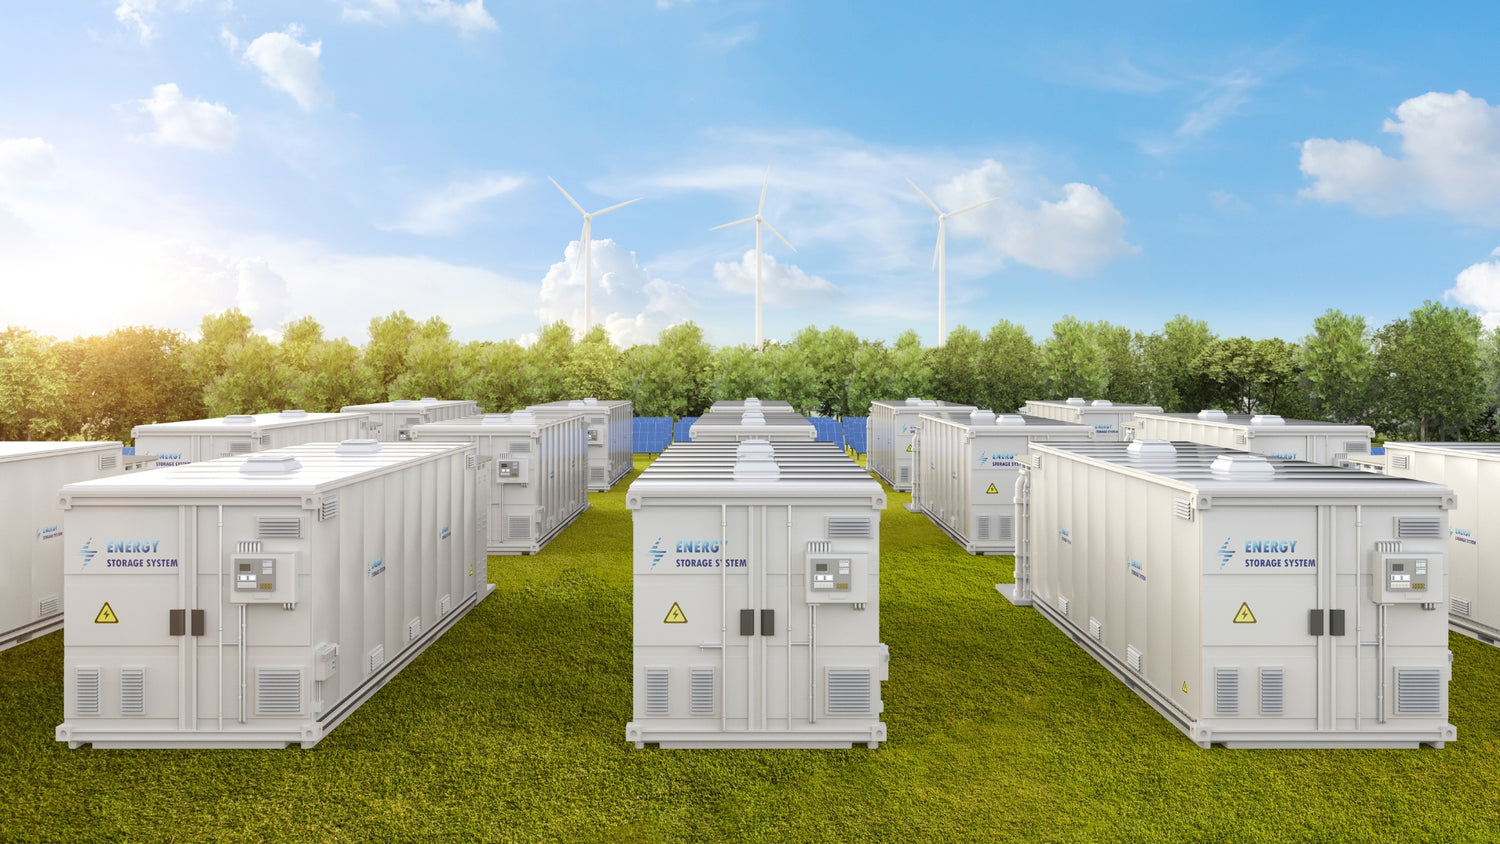 energy storage is a key component of the energy transition